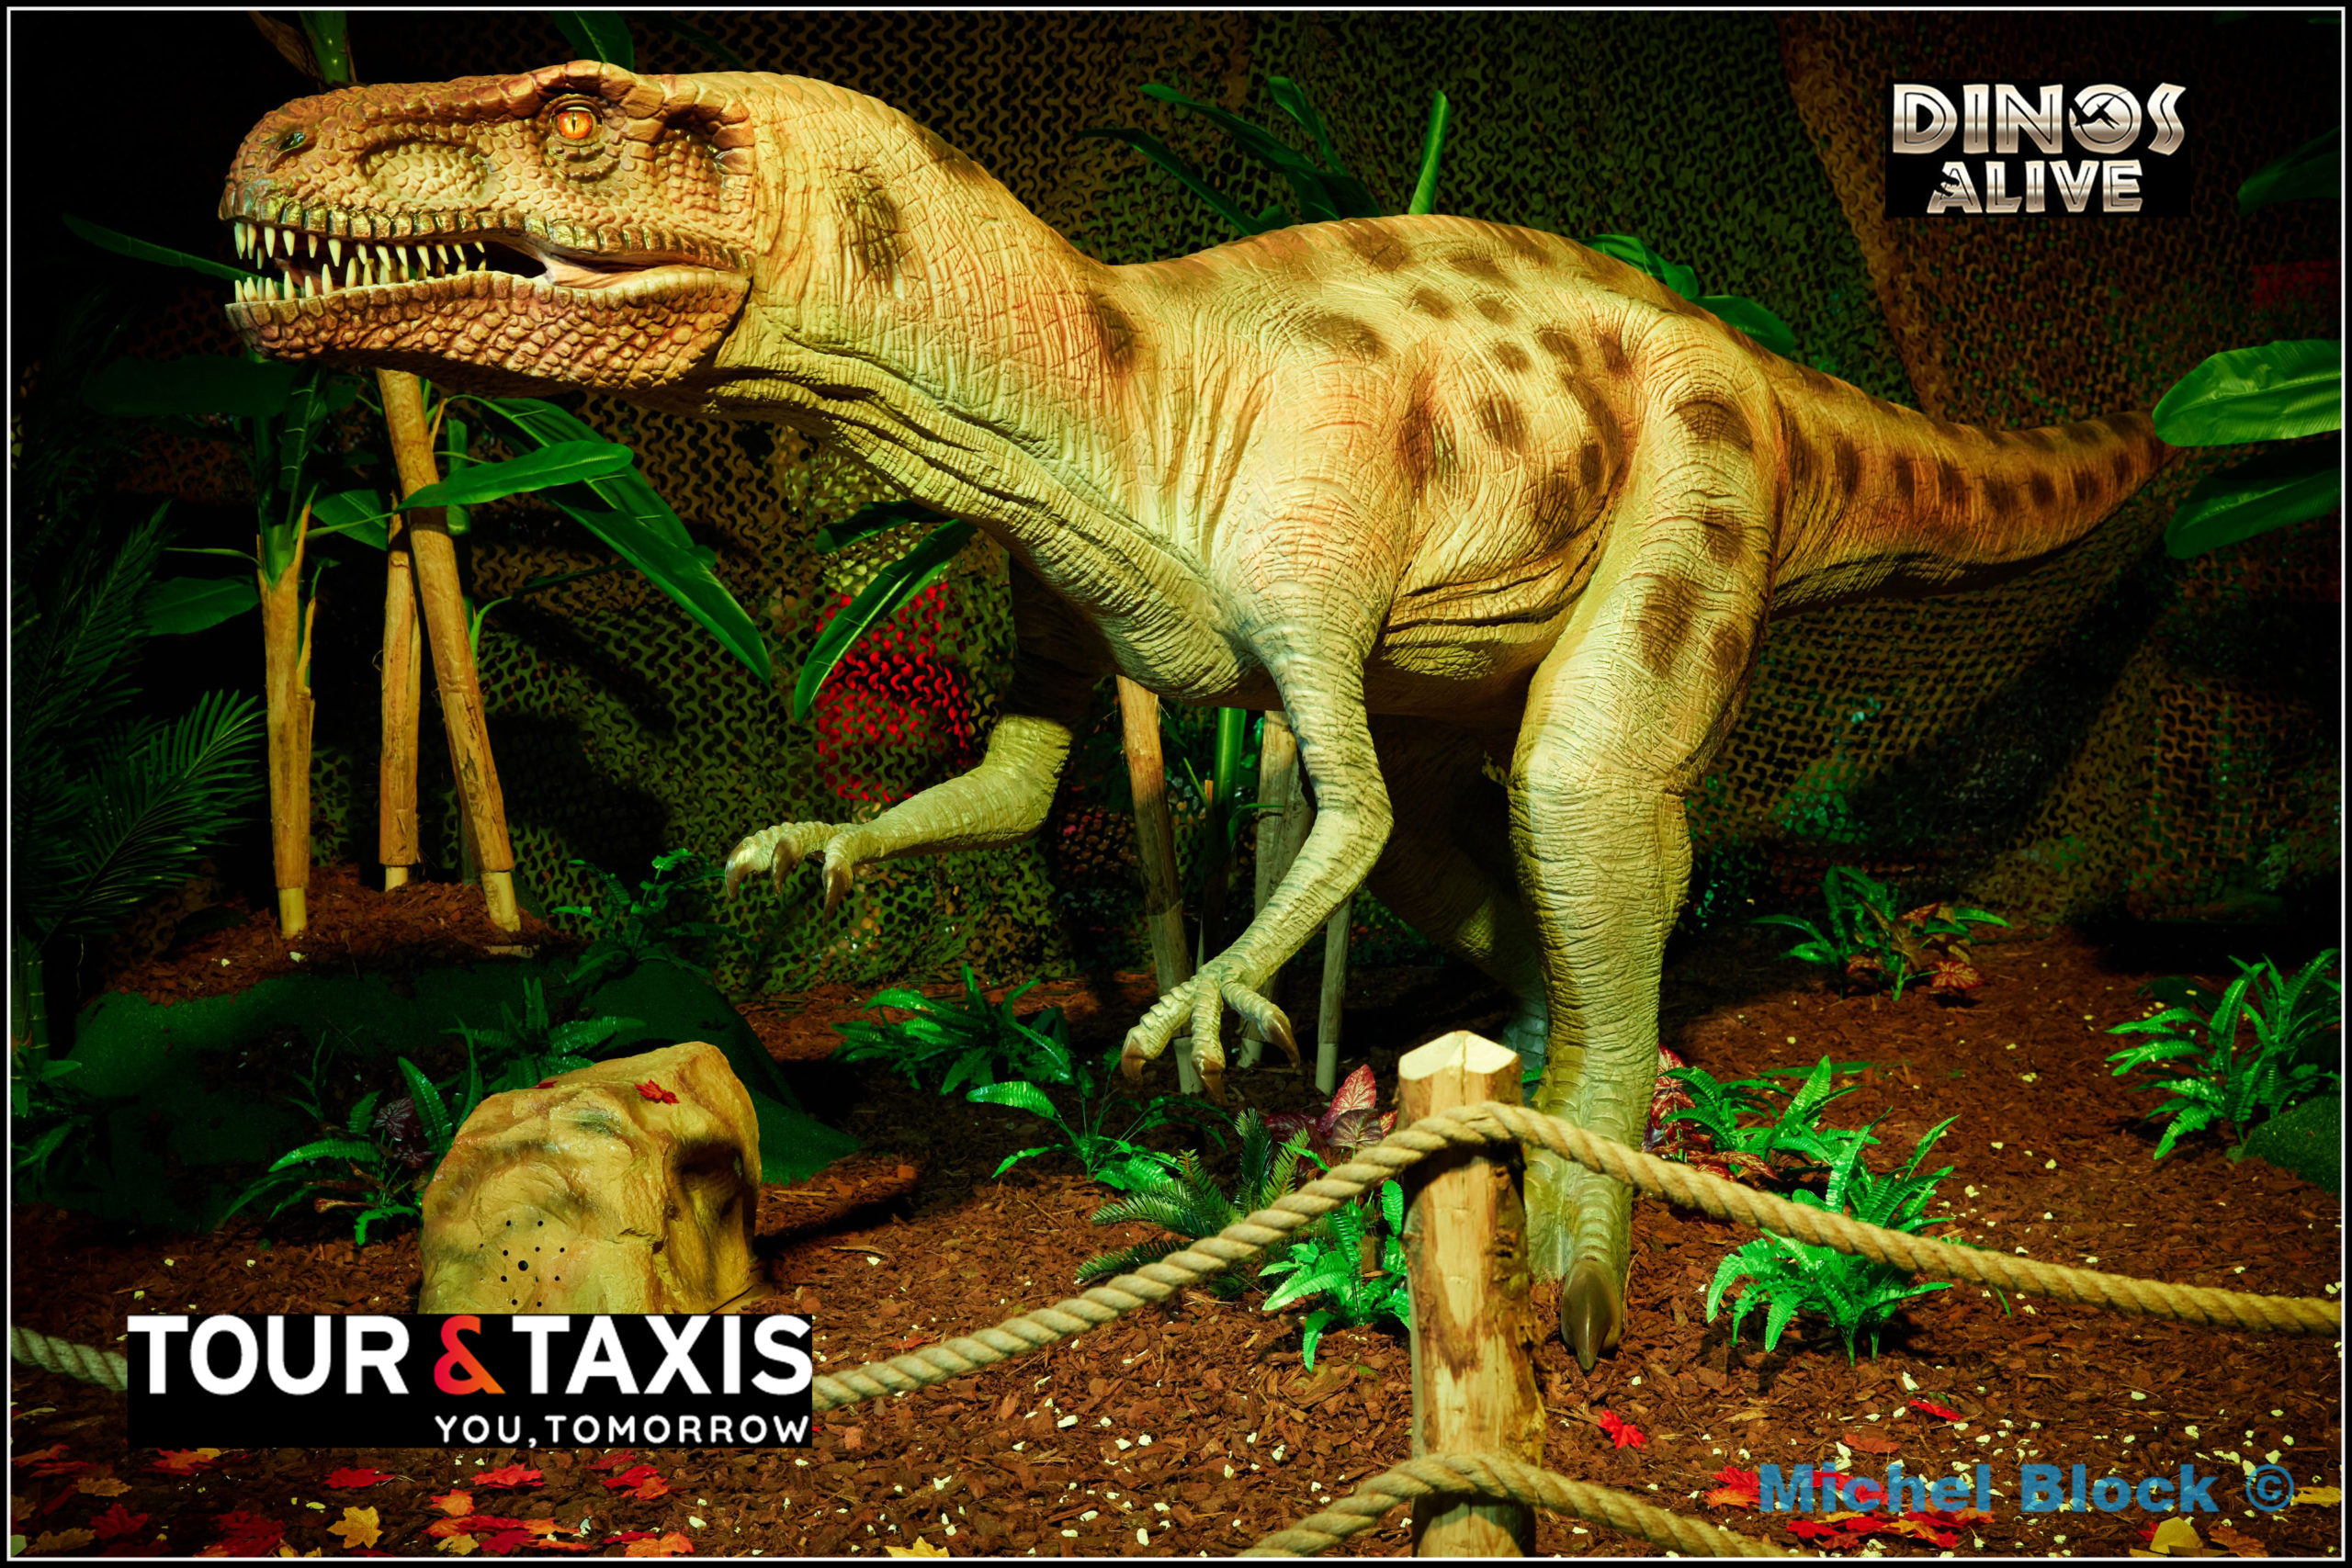 Dino Alive @ Tours & Taxis.